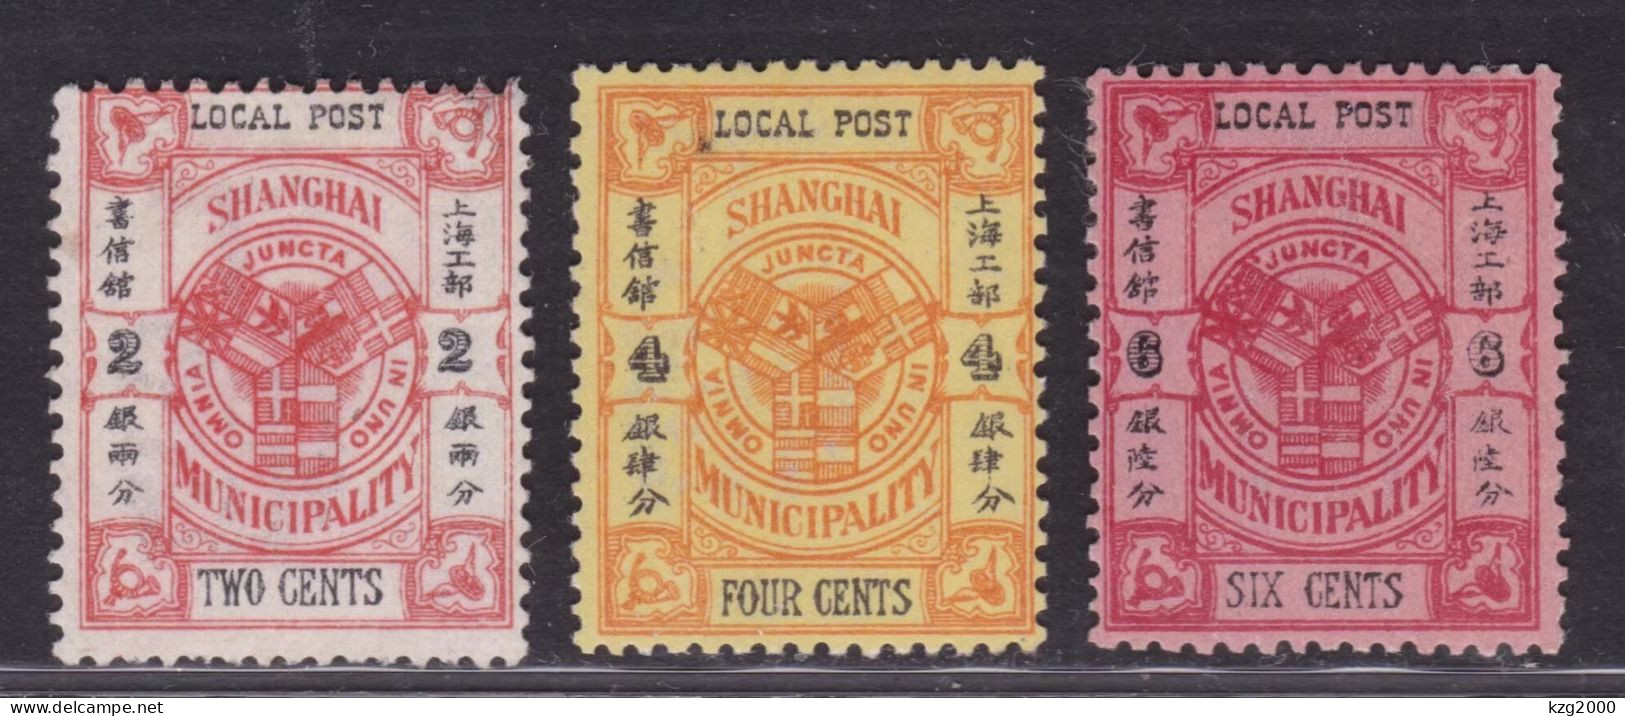 China  Qing Dynasty Stamp 1896 SH.30  2nd Print Shanghai Municipal Council Mark Issue 3 Stamps - Neufs